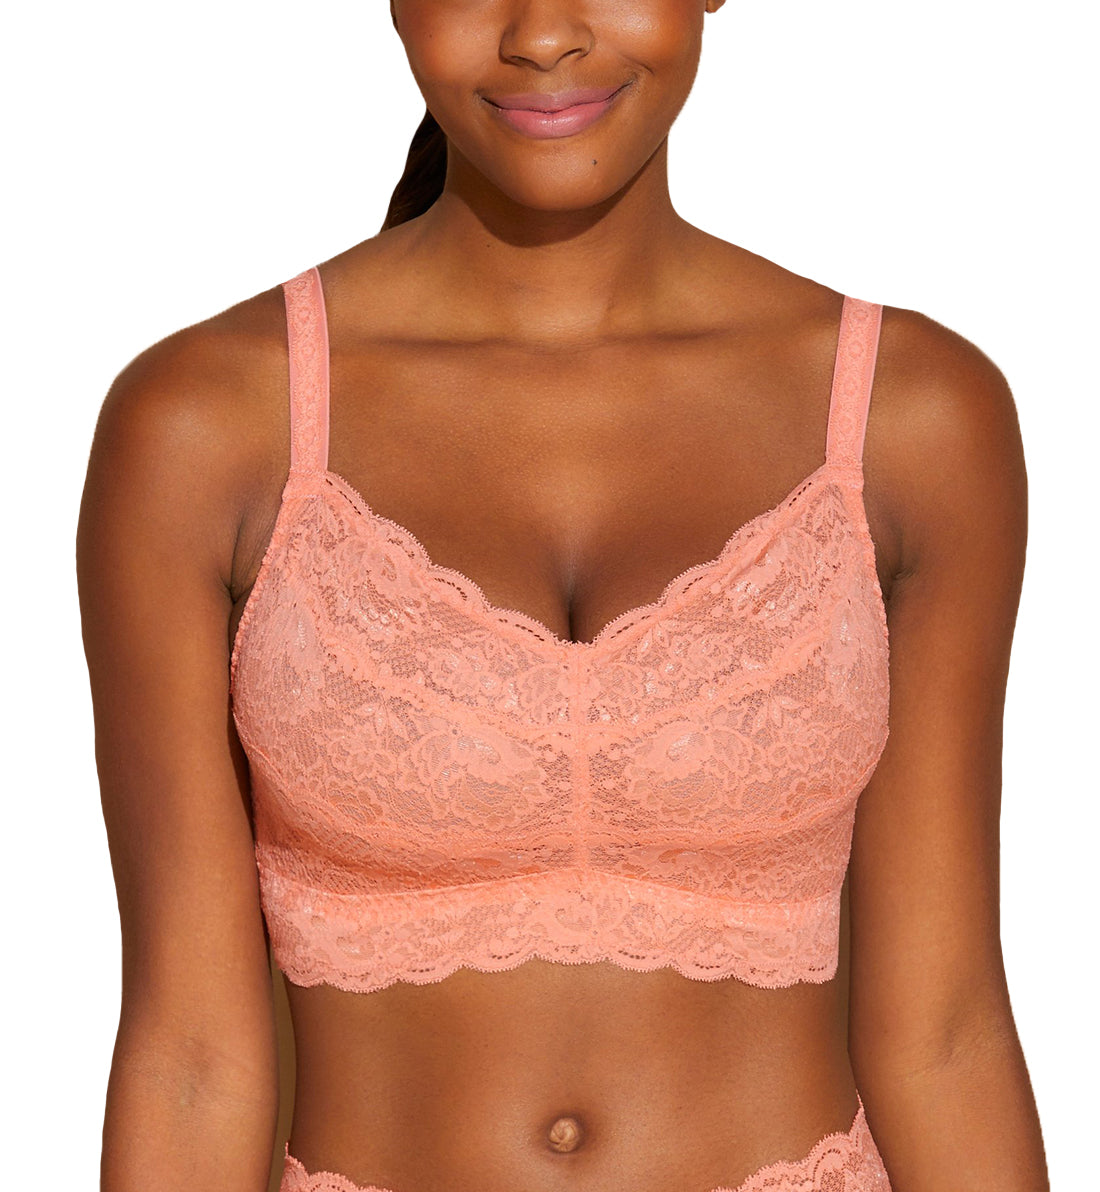 Cosabella Never Say Never CURVY Sweetie Bralette (NEVER1310),XS,Coral Breeze - Coral Breeze,XS